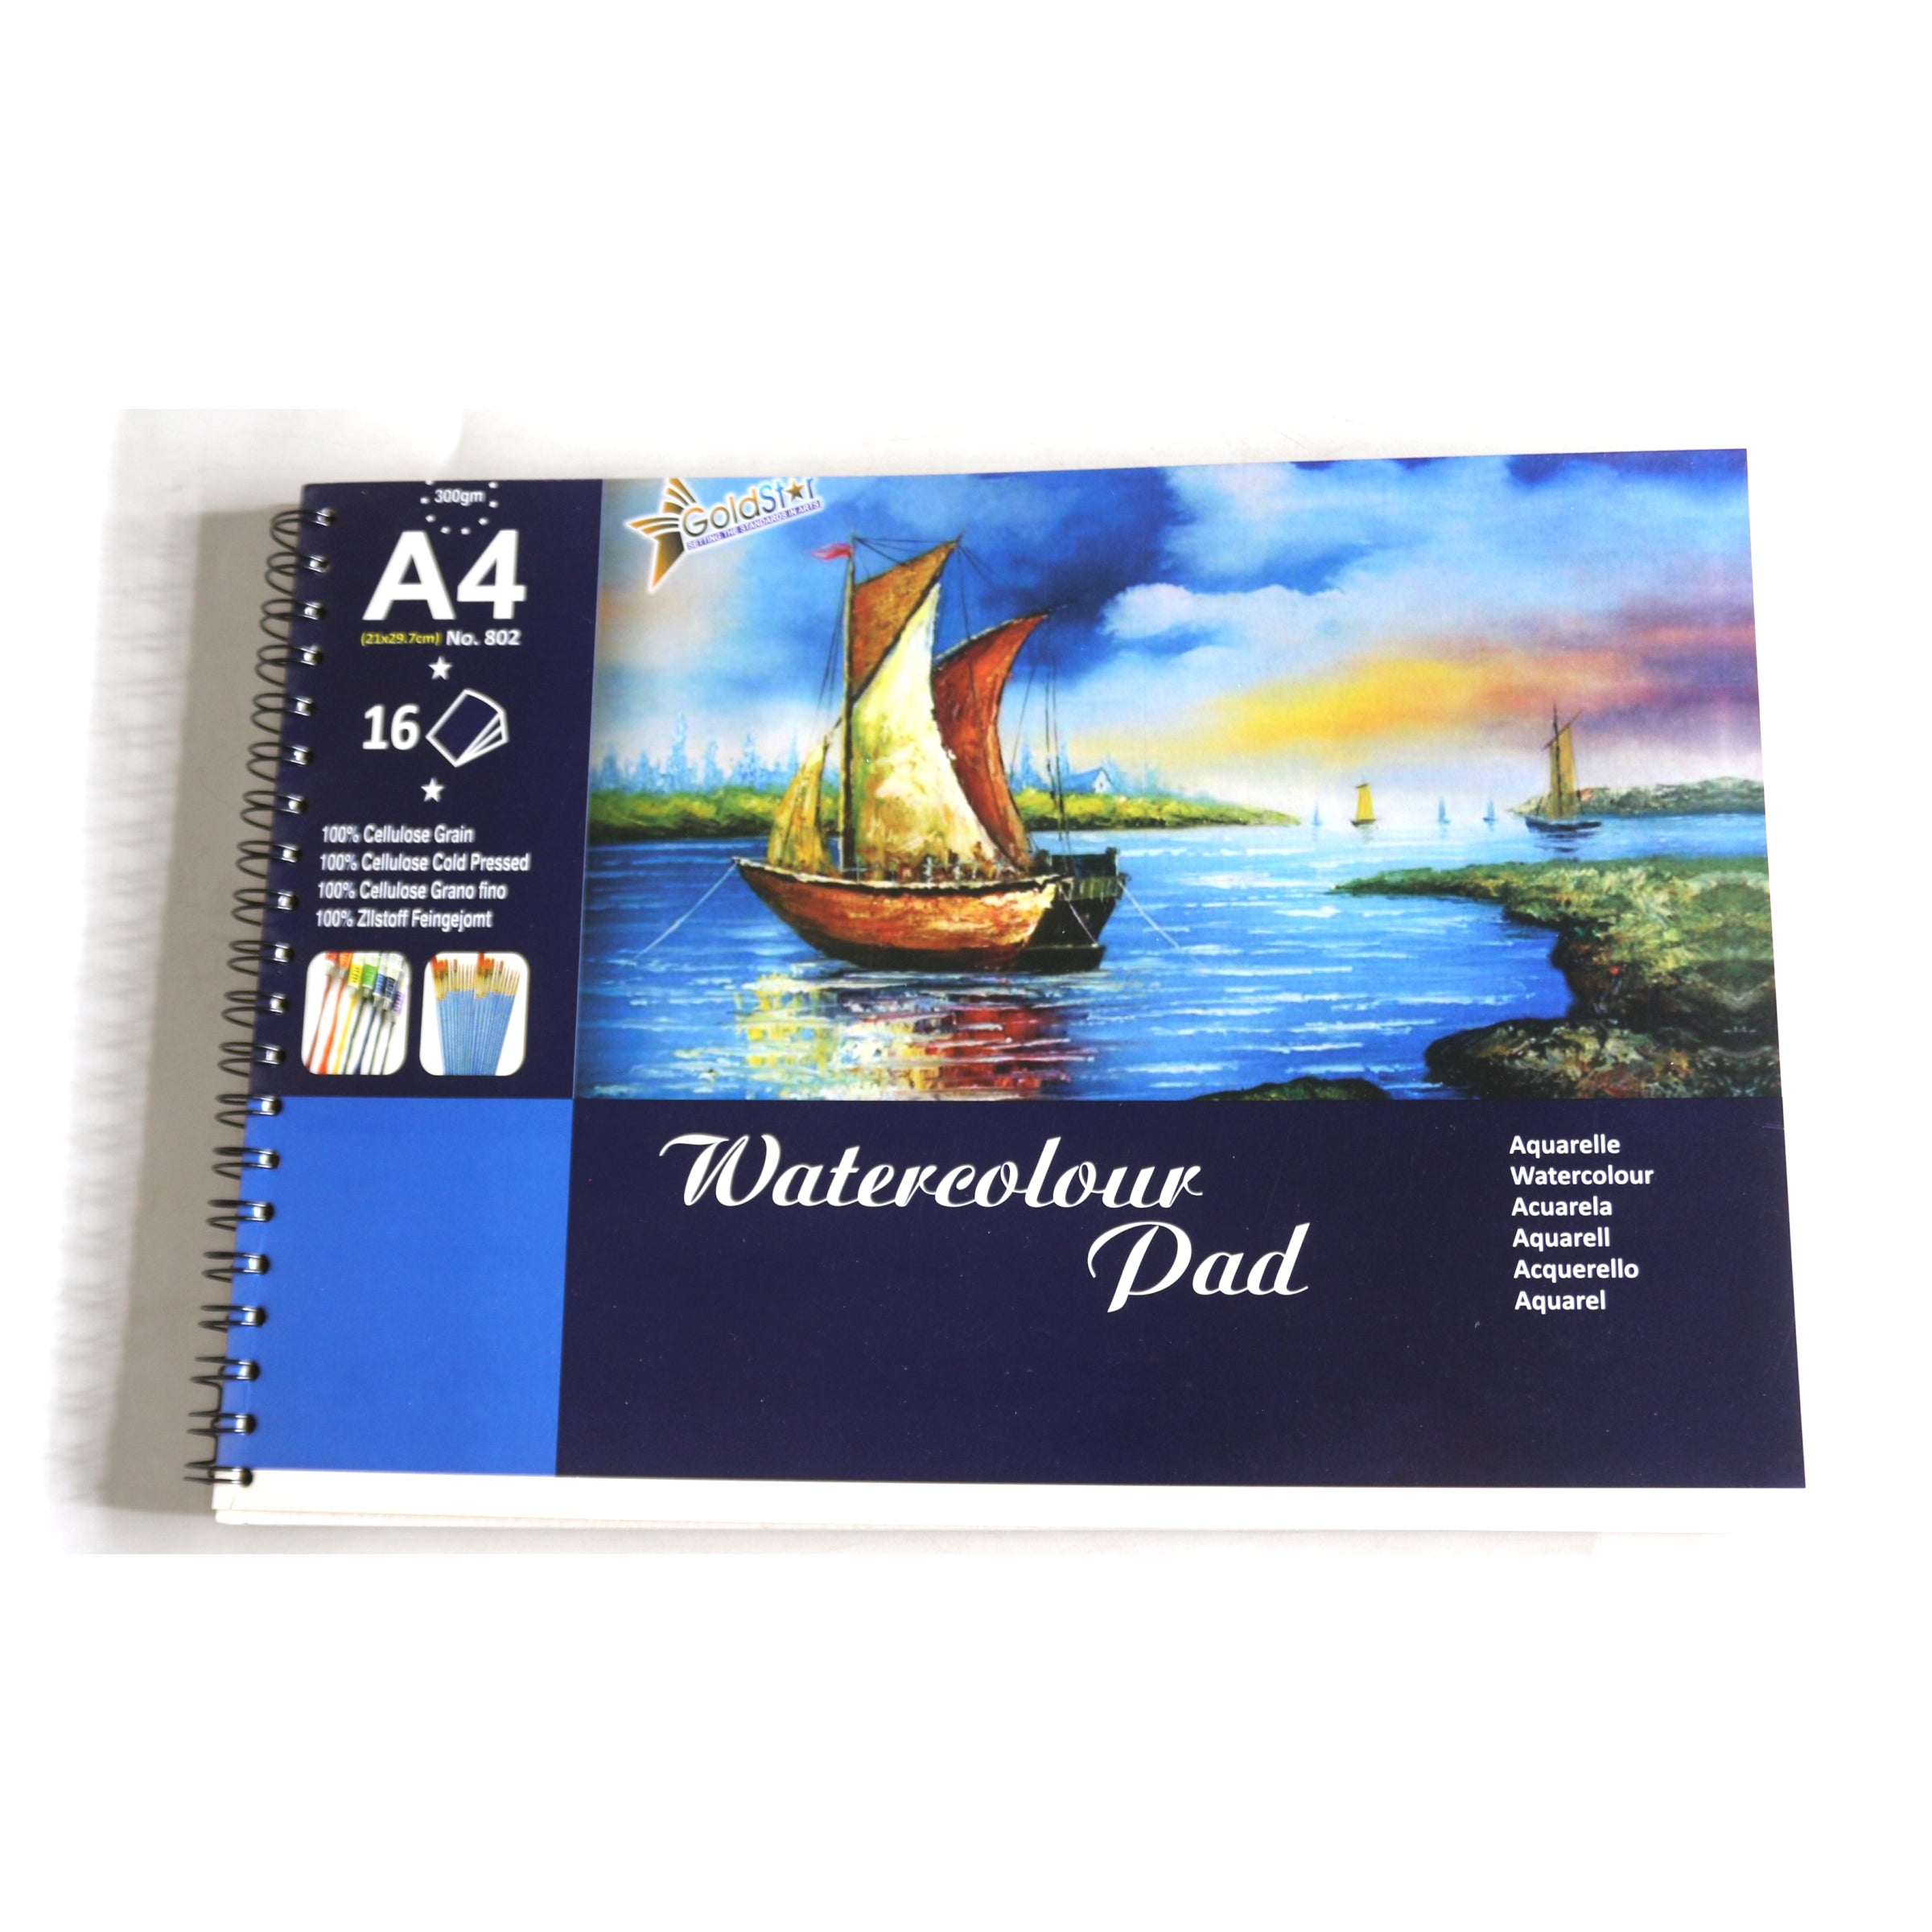 Watercolor Pad 300gm A4 SIze